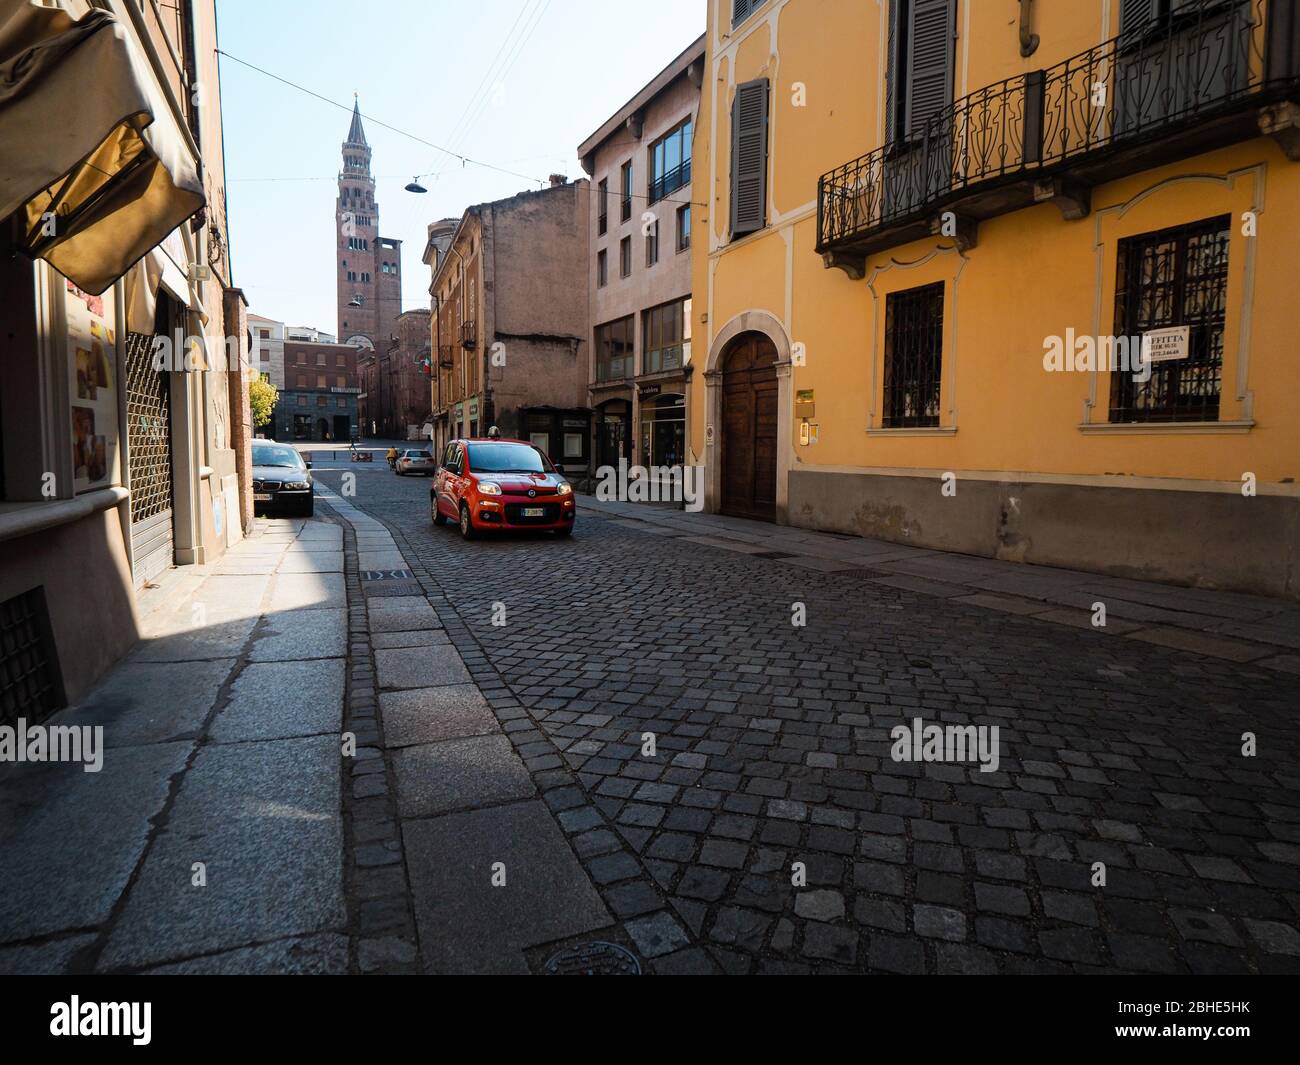 Cremona, Lombardy, Italy - April 25 th 2020 - deserted cityscapes in the center and everyday city life during coronavirus outbreak city lockdown Stock Photo